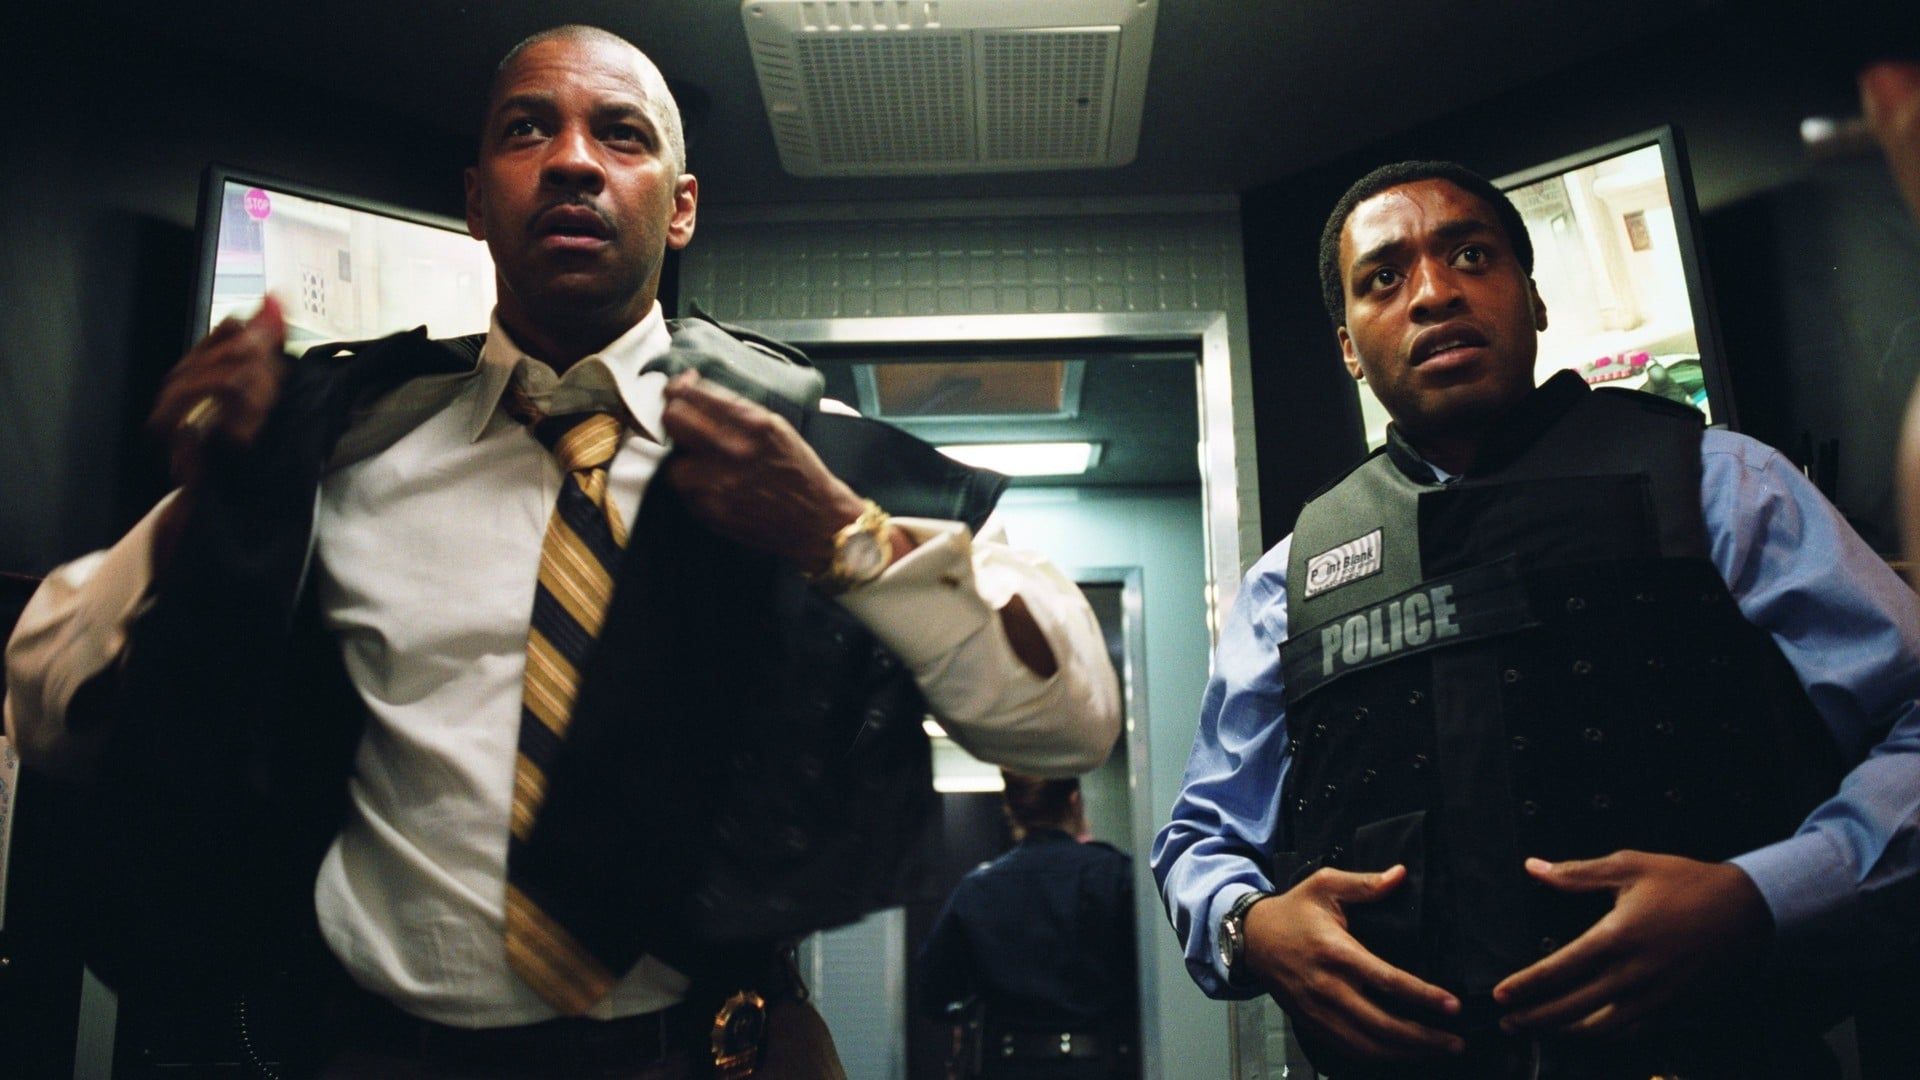 Inside Man on Netflix - Movies like The Old Guard